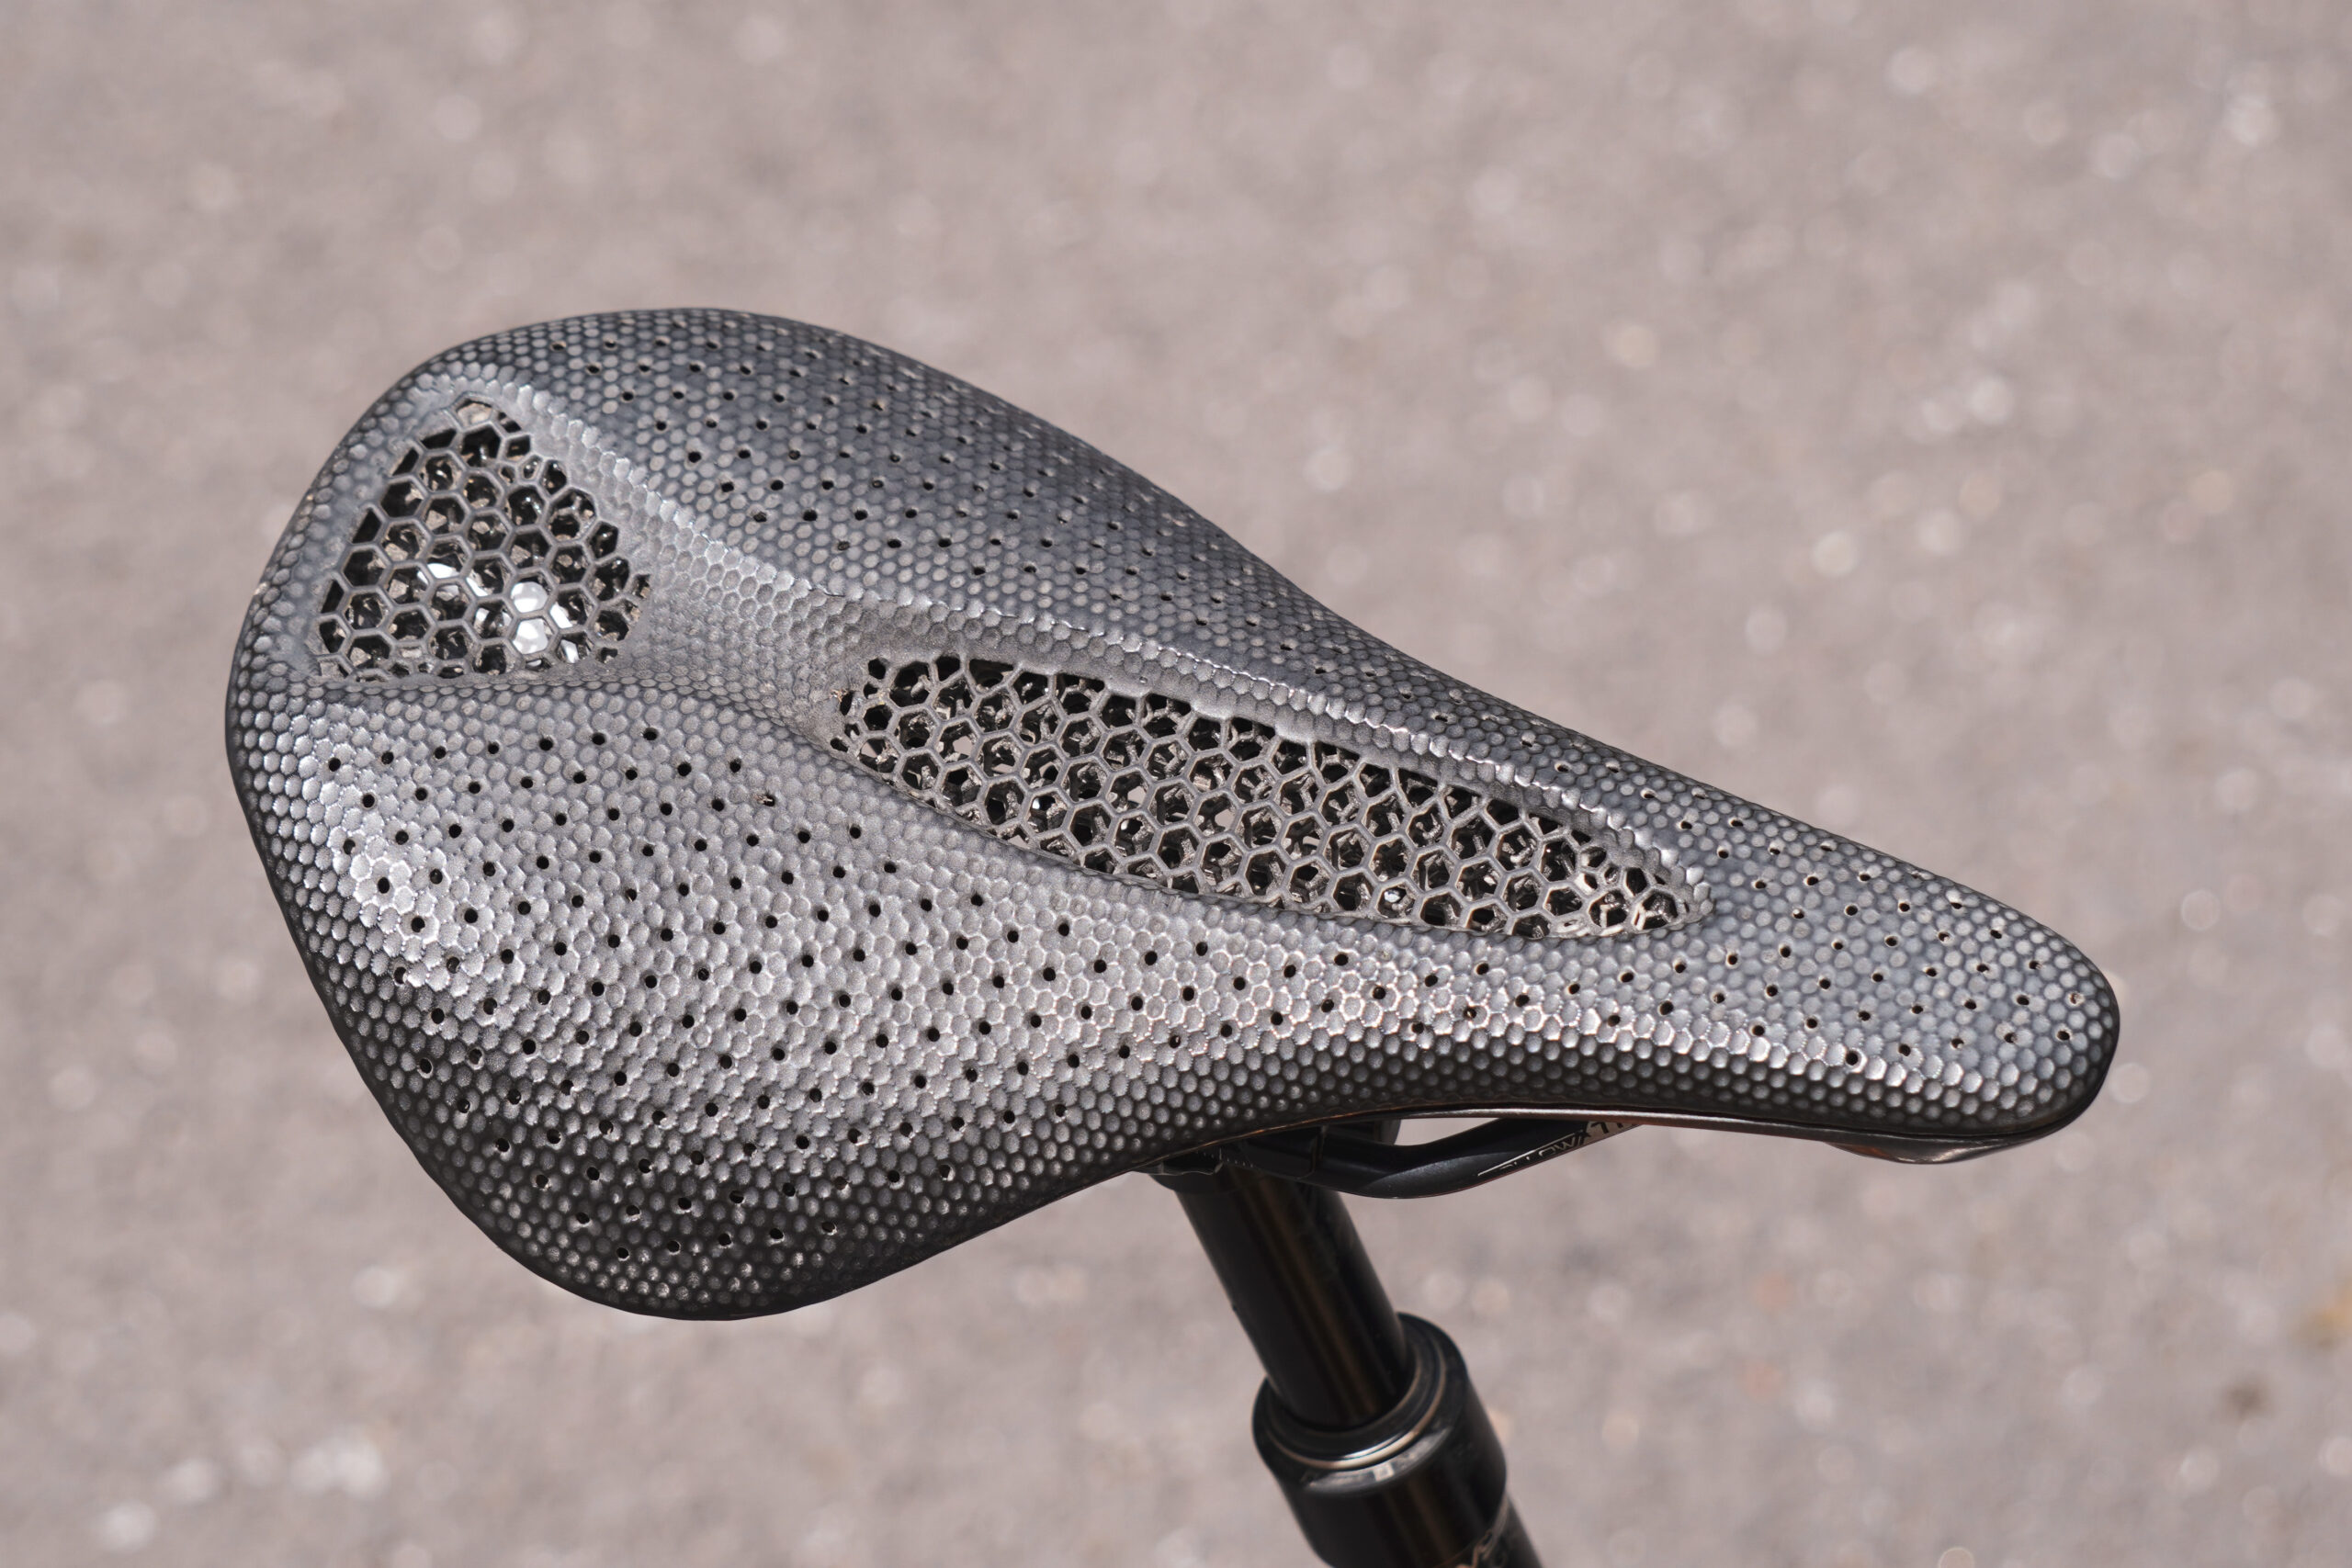 Specialized Power Pro Mirror Saddle Review